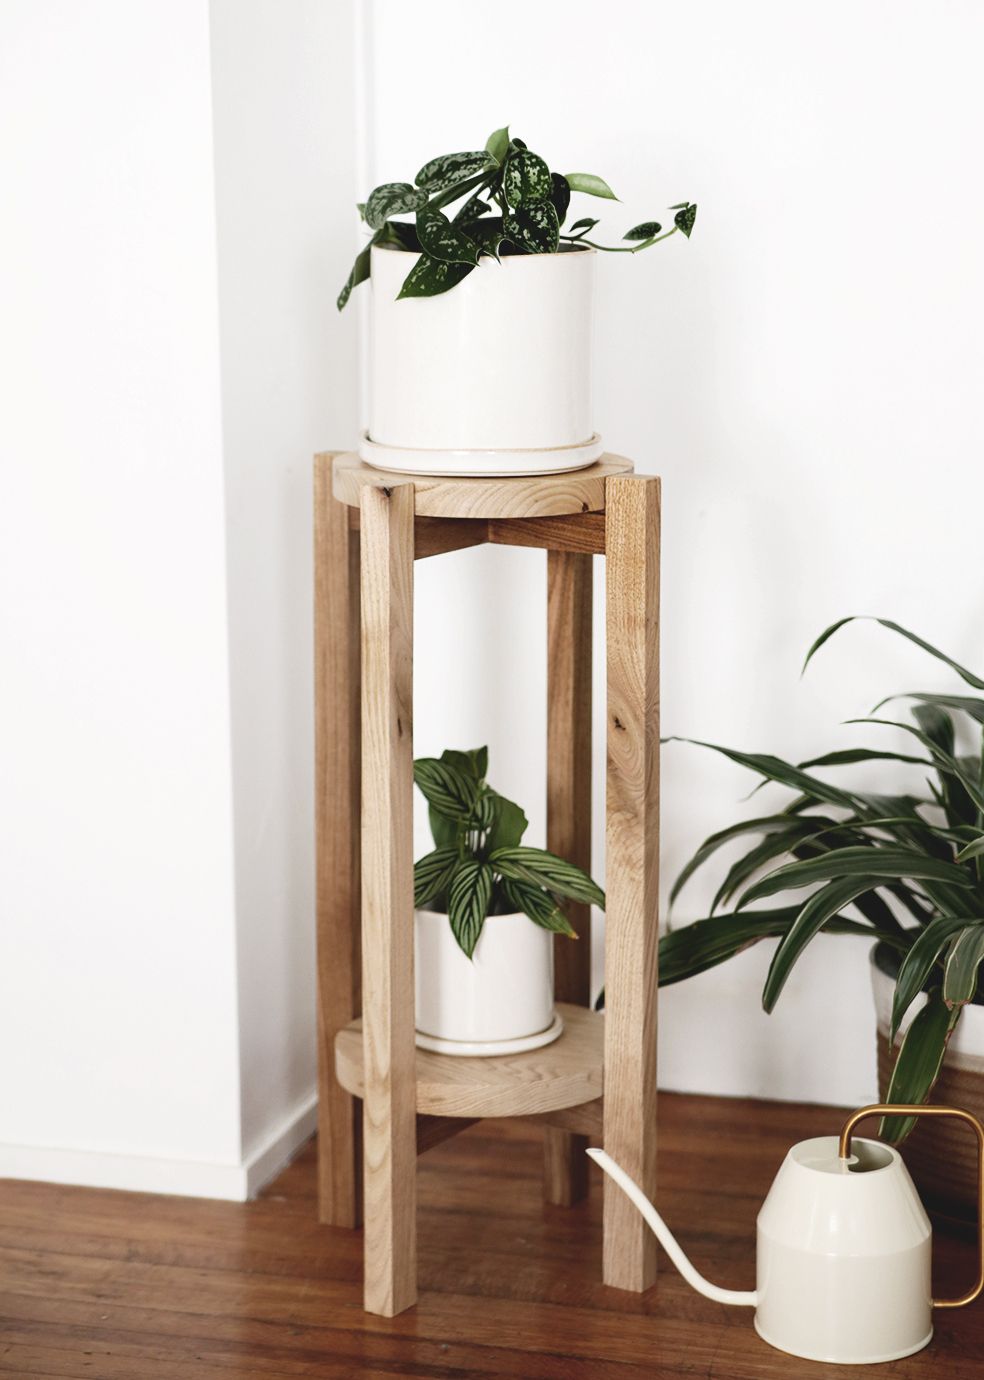 Diy Wood Plant Stand – A Simple Diy With A Video Tutorial With Wood Plant Stands (View 2 of 15)